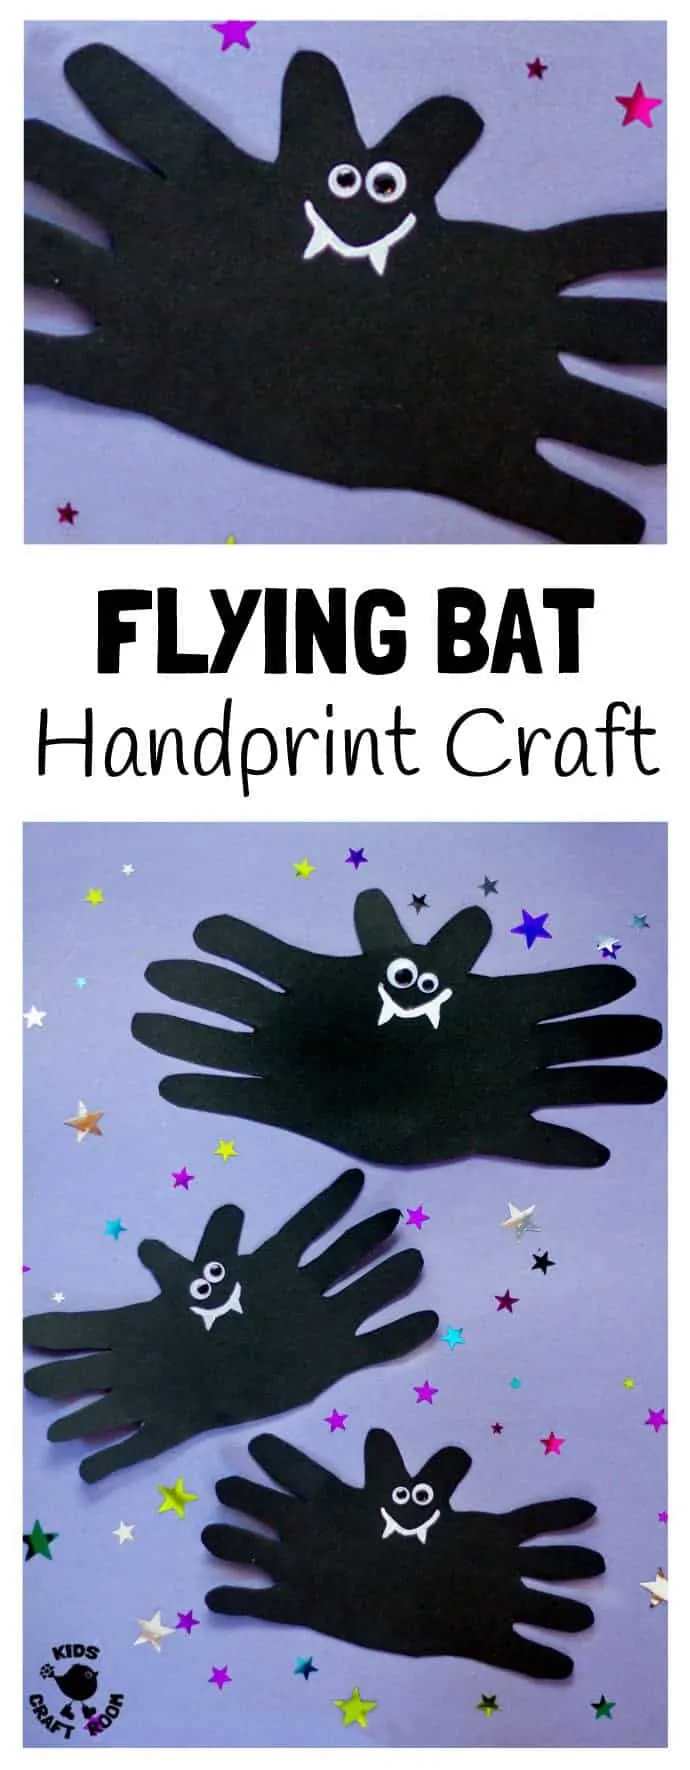 Four different sized Halloween bat crafts. Each is made from black paper and handprints. The fingers make the wings and the thumbs make the ears.